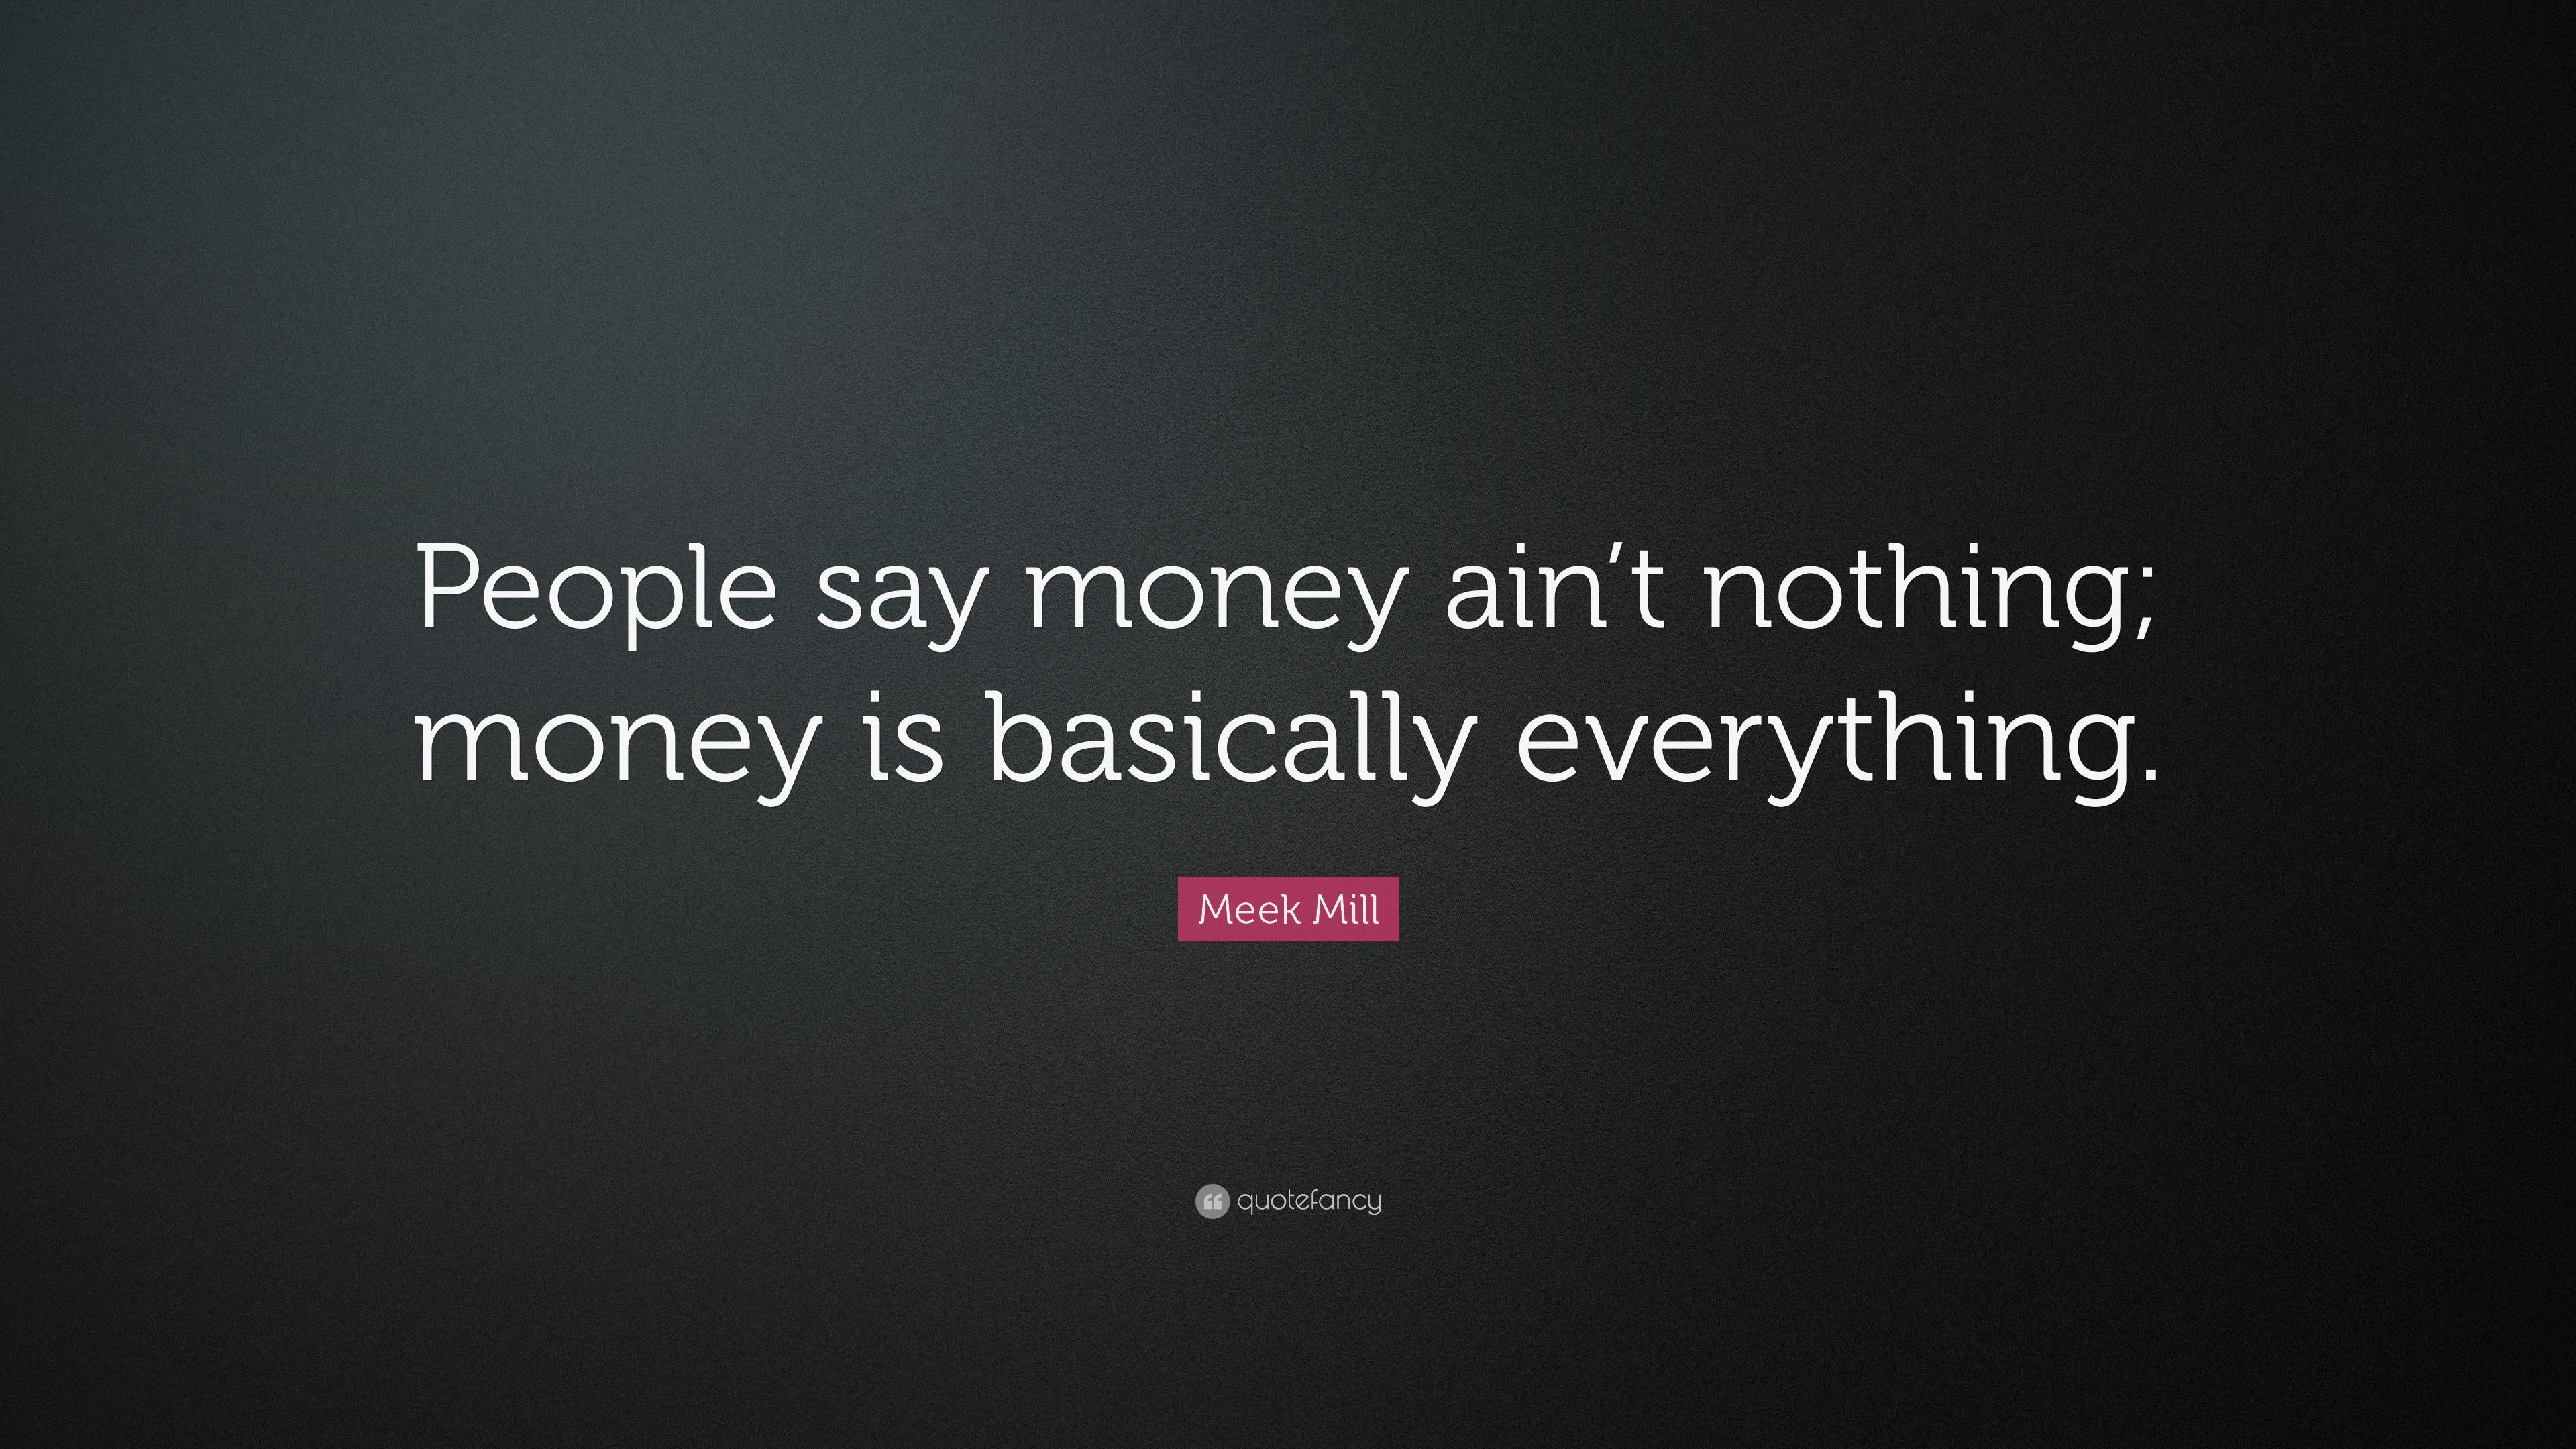 Meek Mill Quote: “People say money ain't nothing; money is